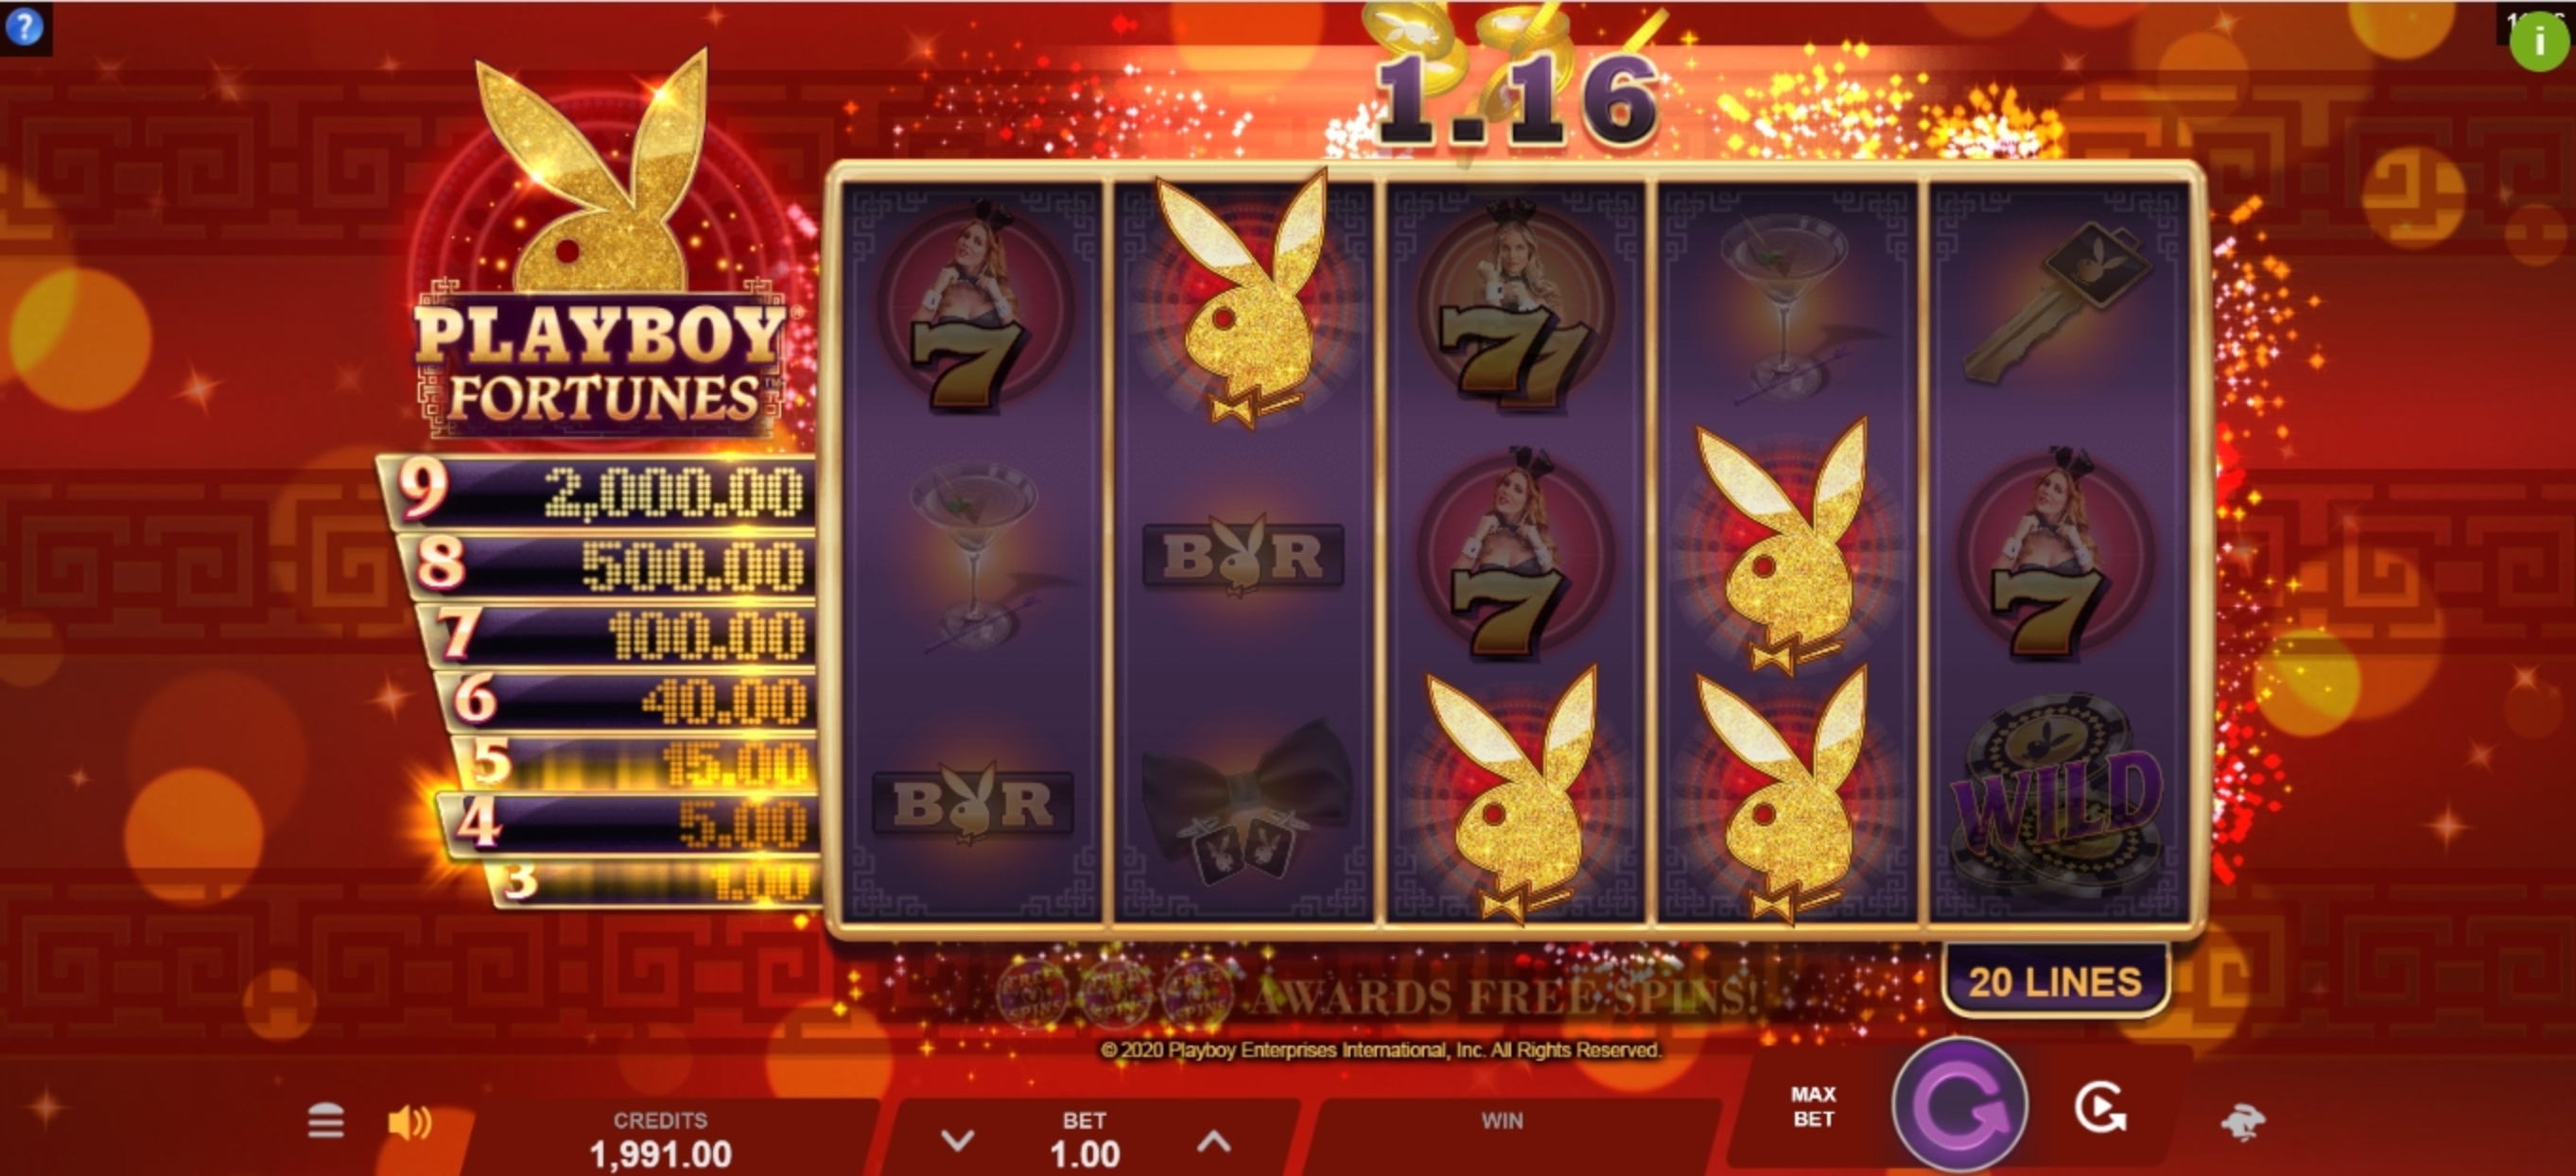 Win Money in Playboy Fortunes Free Slot Game by Gameburger Studios